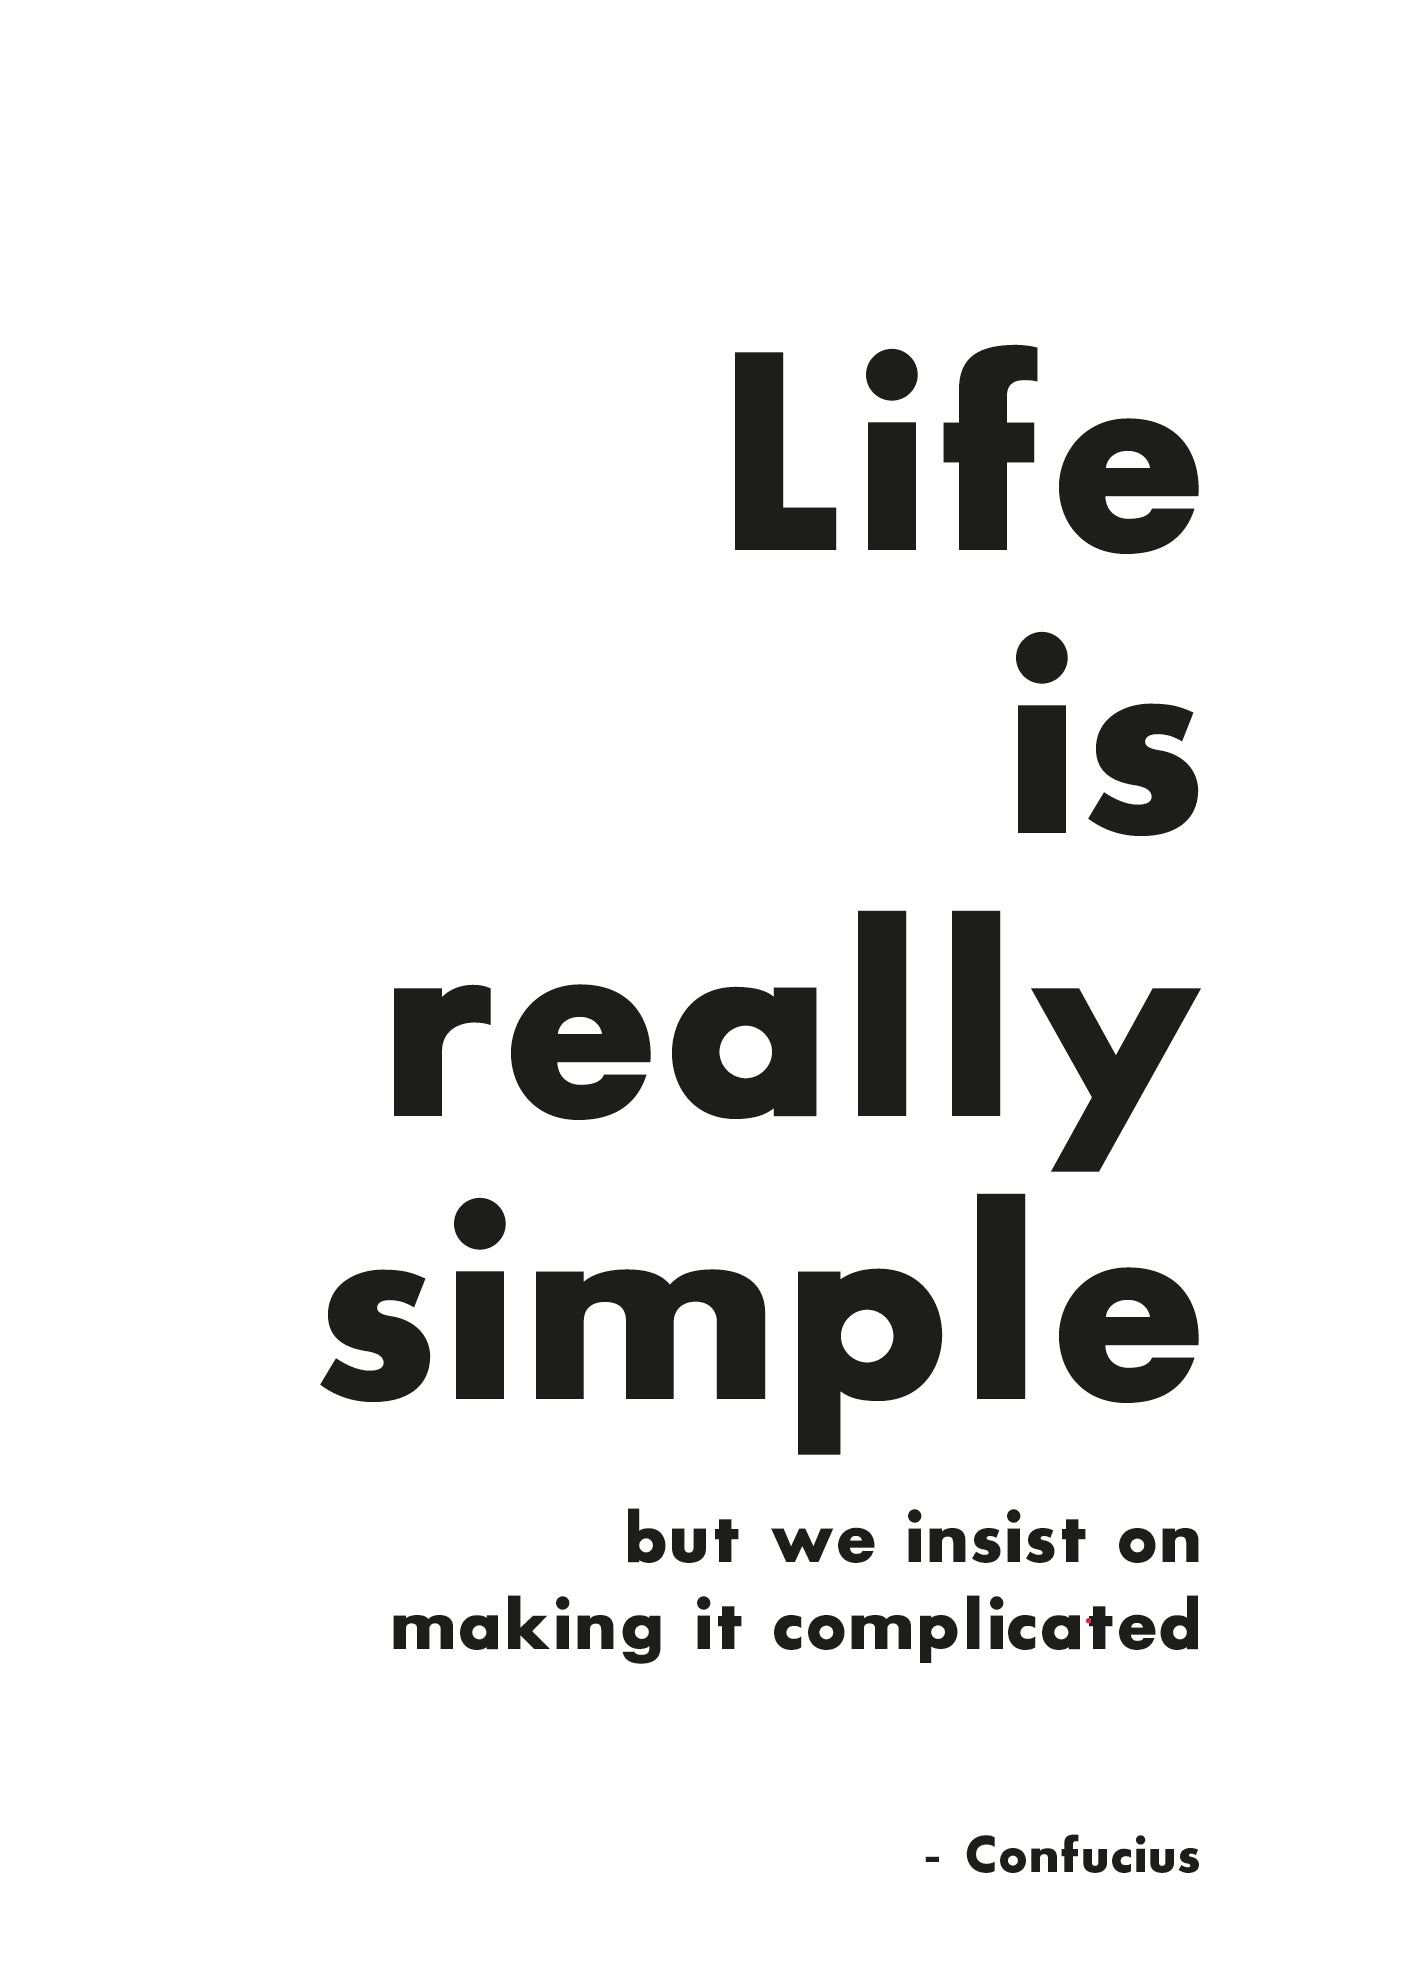 Life is really simple - sort